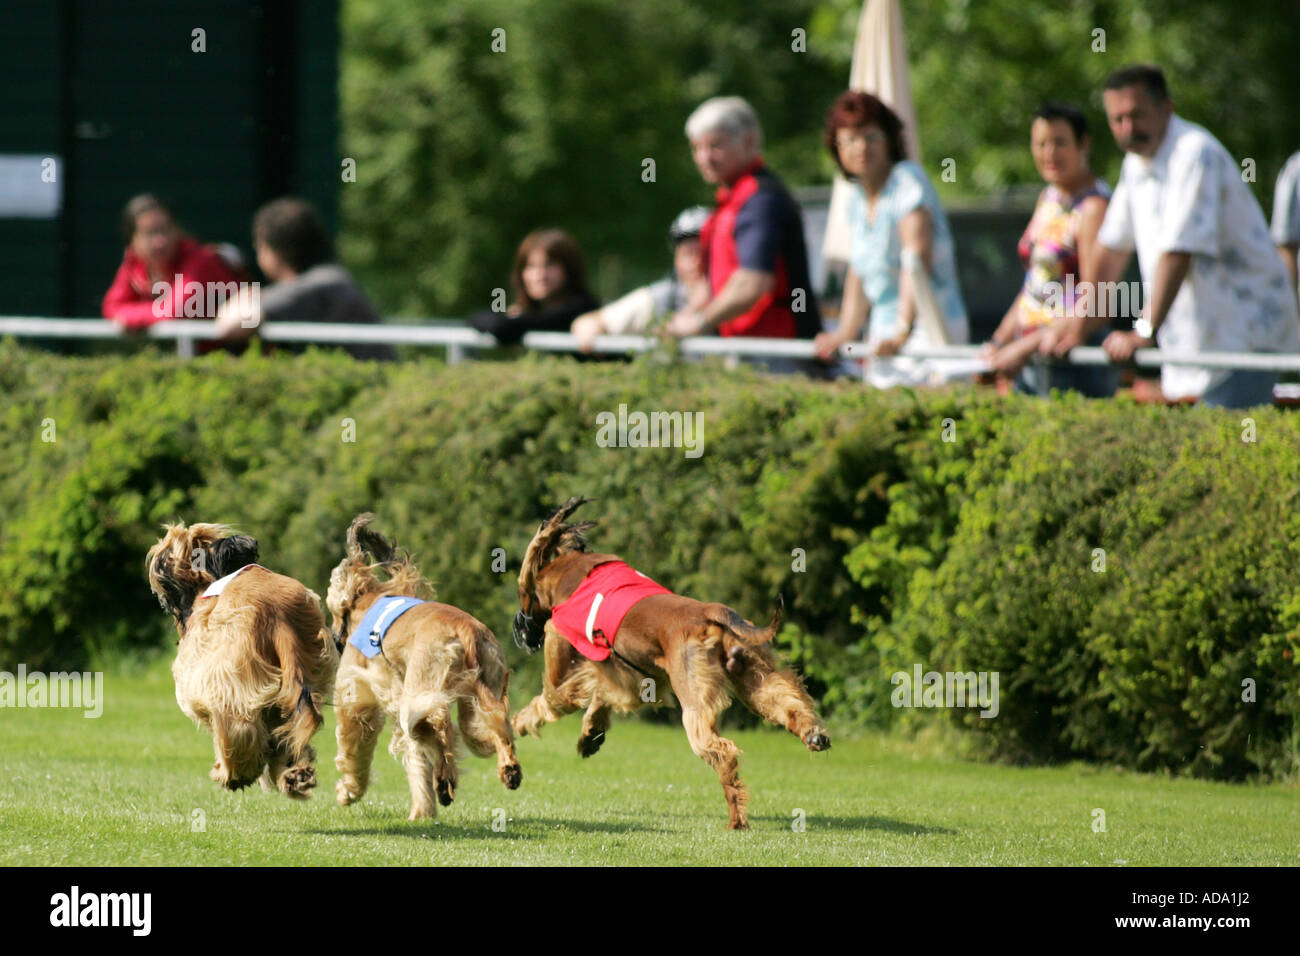 Afghanistan Hound, Afghan Hound (Canis lupus f. familiaris), at race, Germany Stock Photo